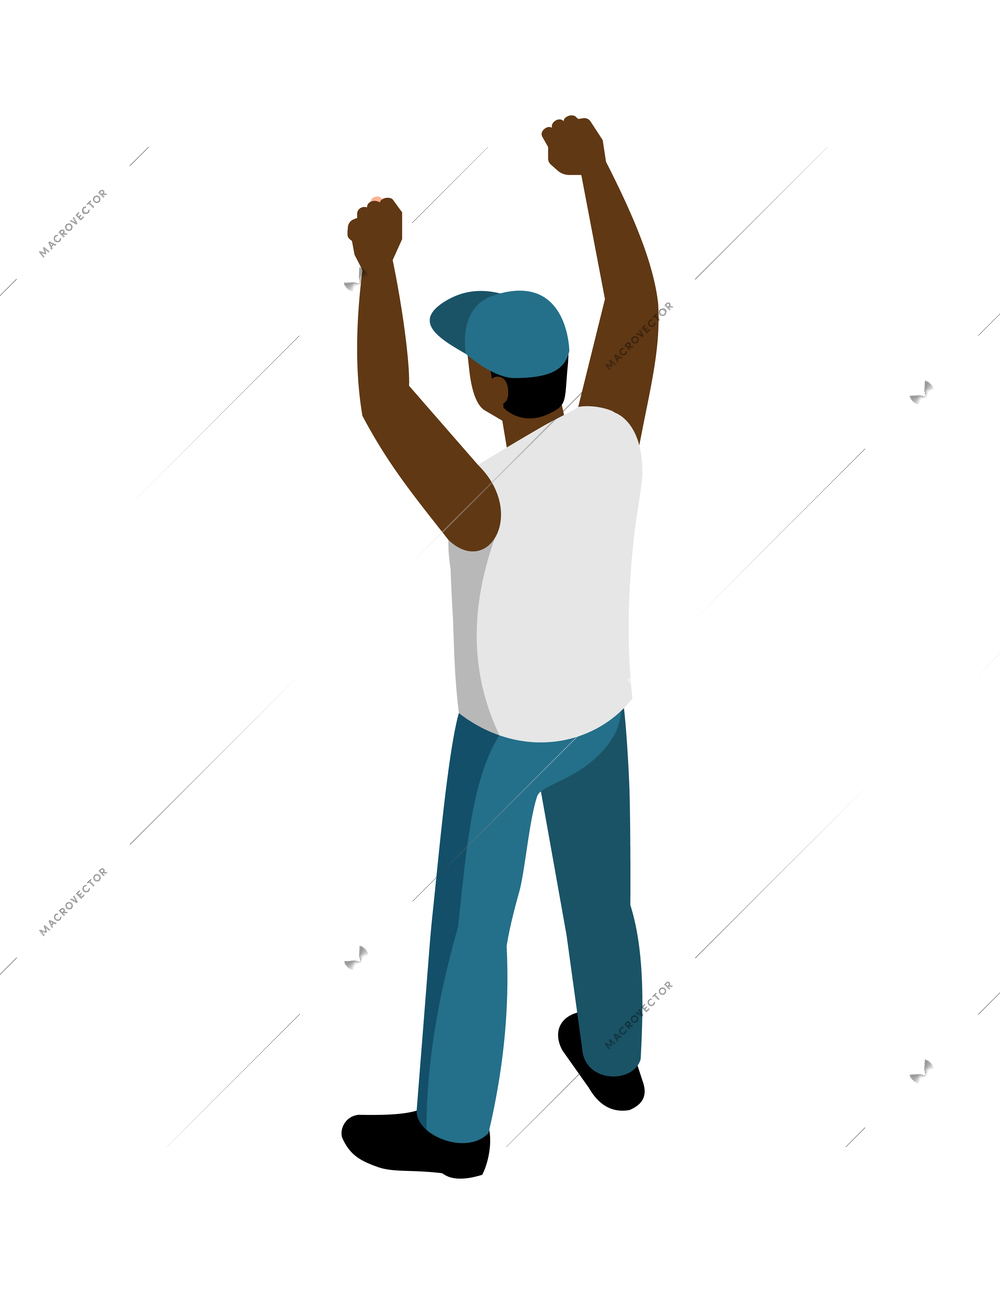 Isometric icon of man protester with raised hands on white background 3d vector illustration